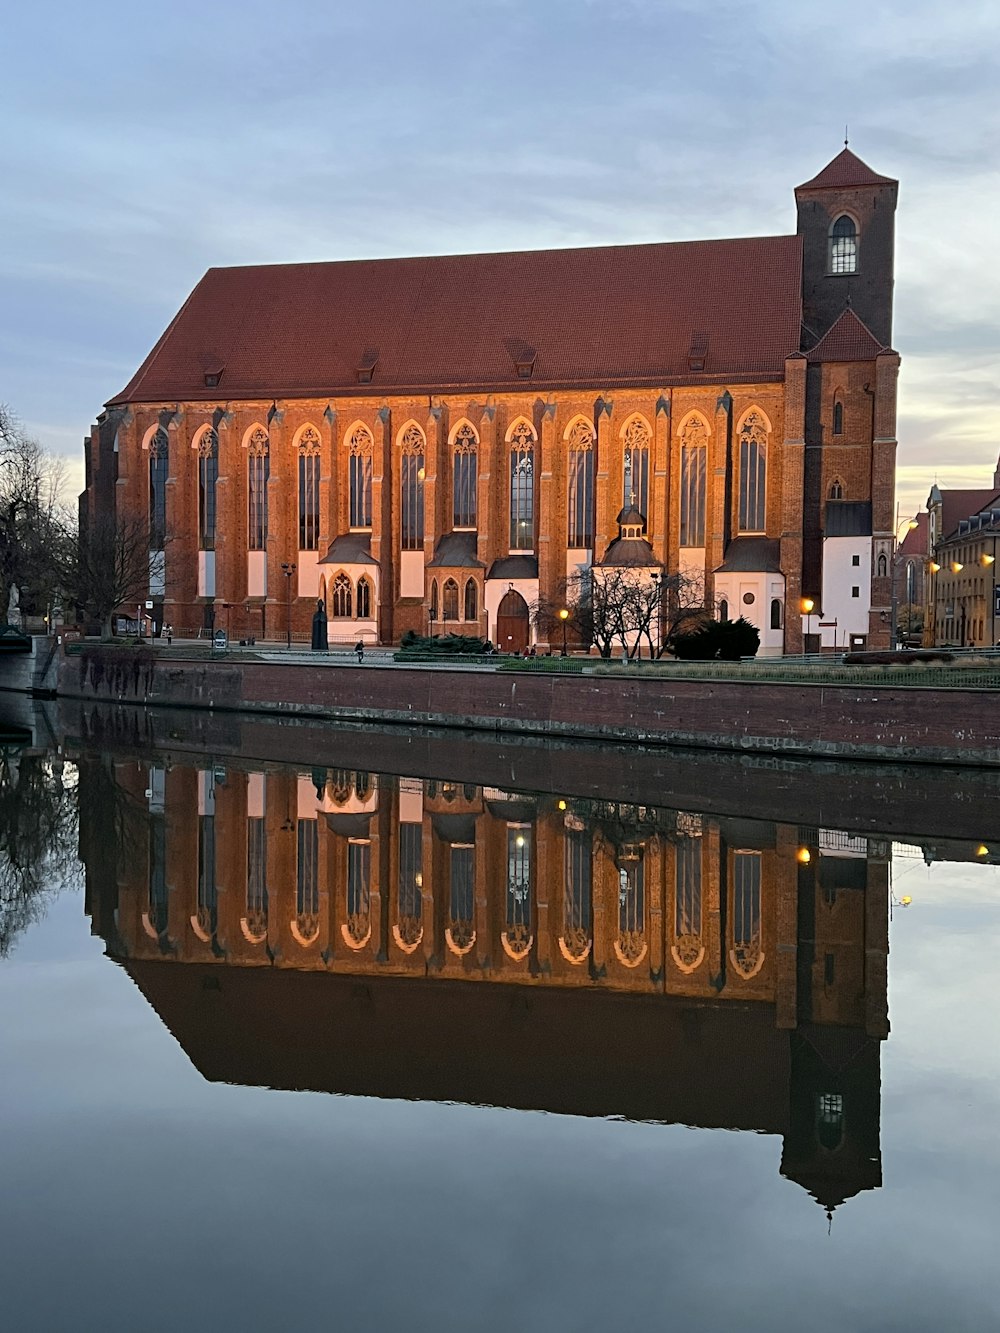 a large building with a clock tower next to a body of water